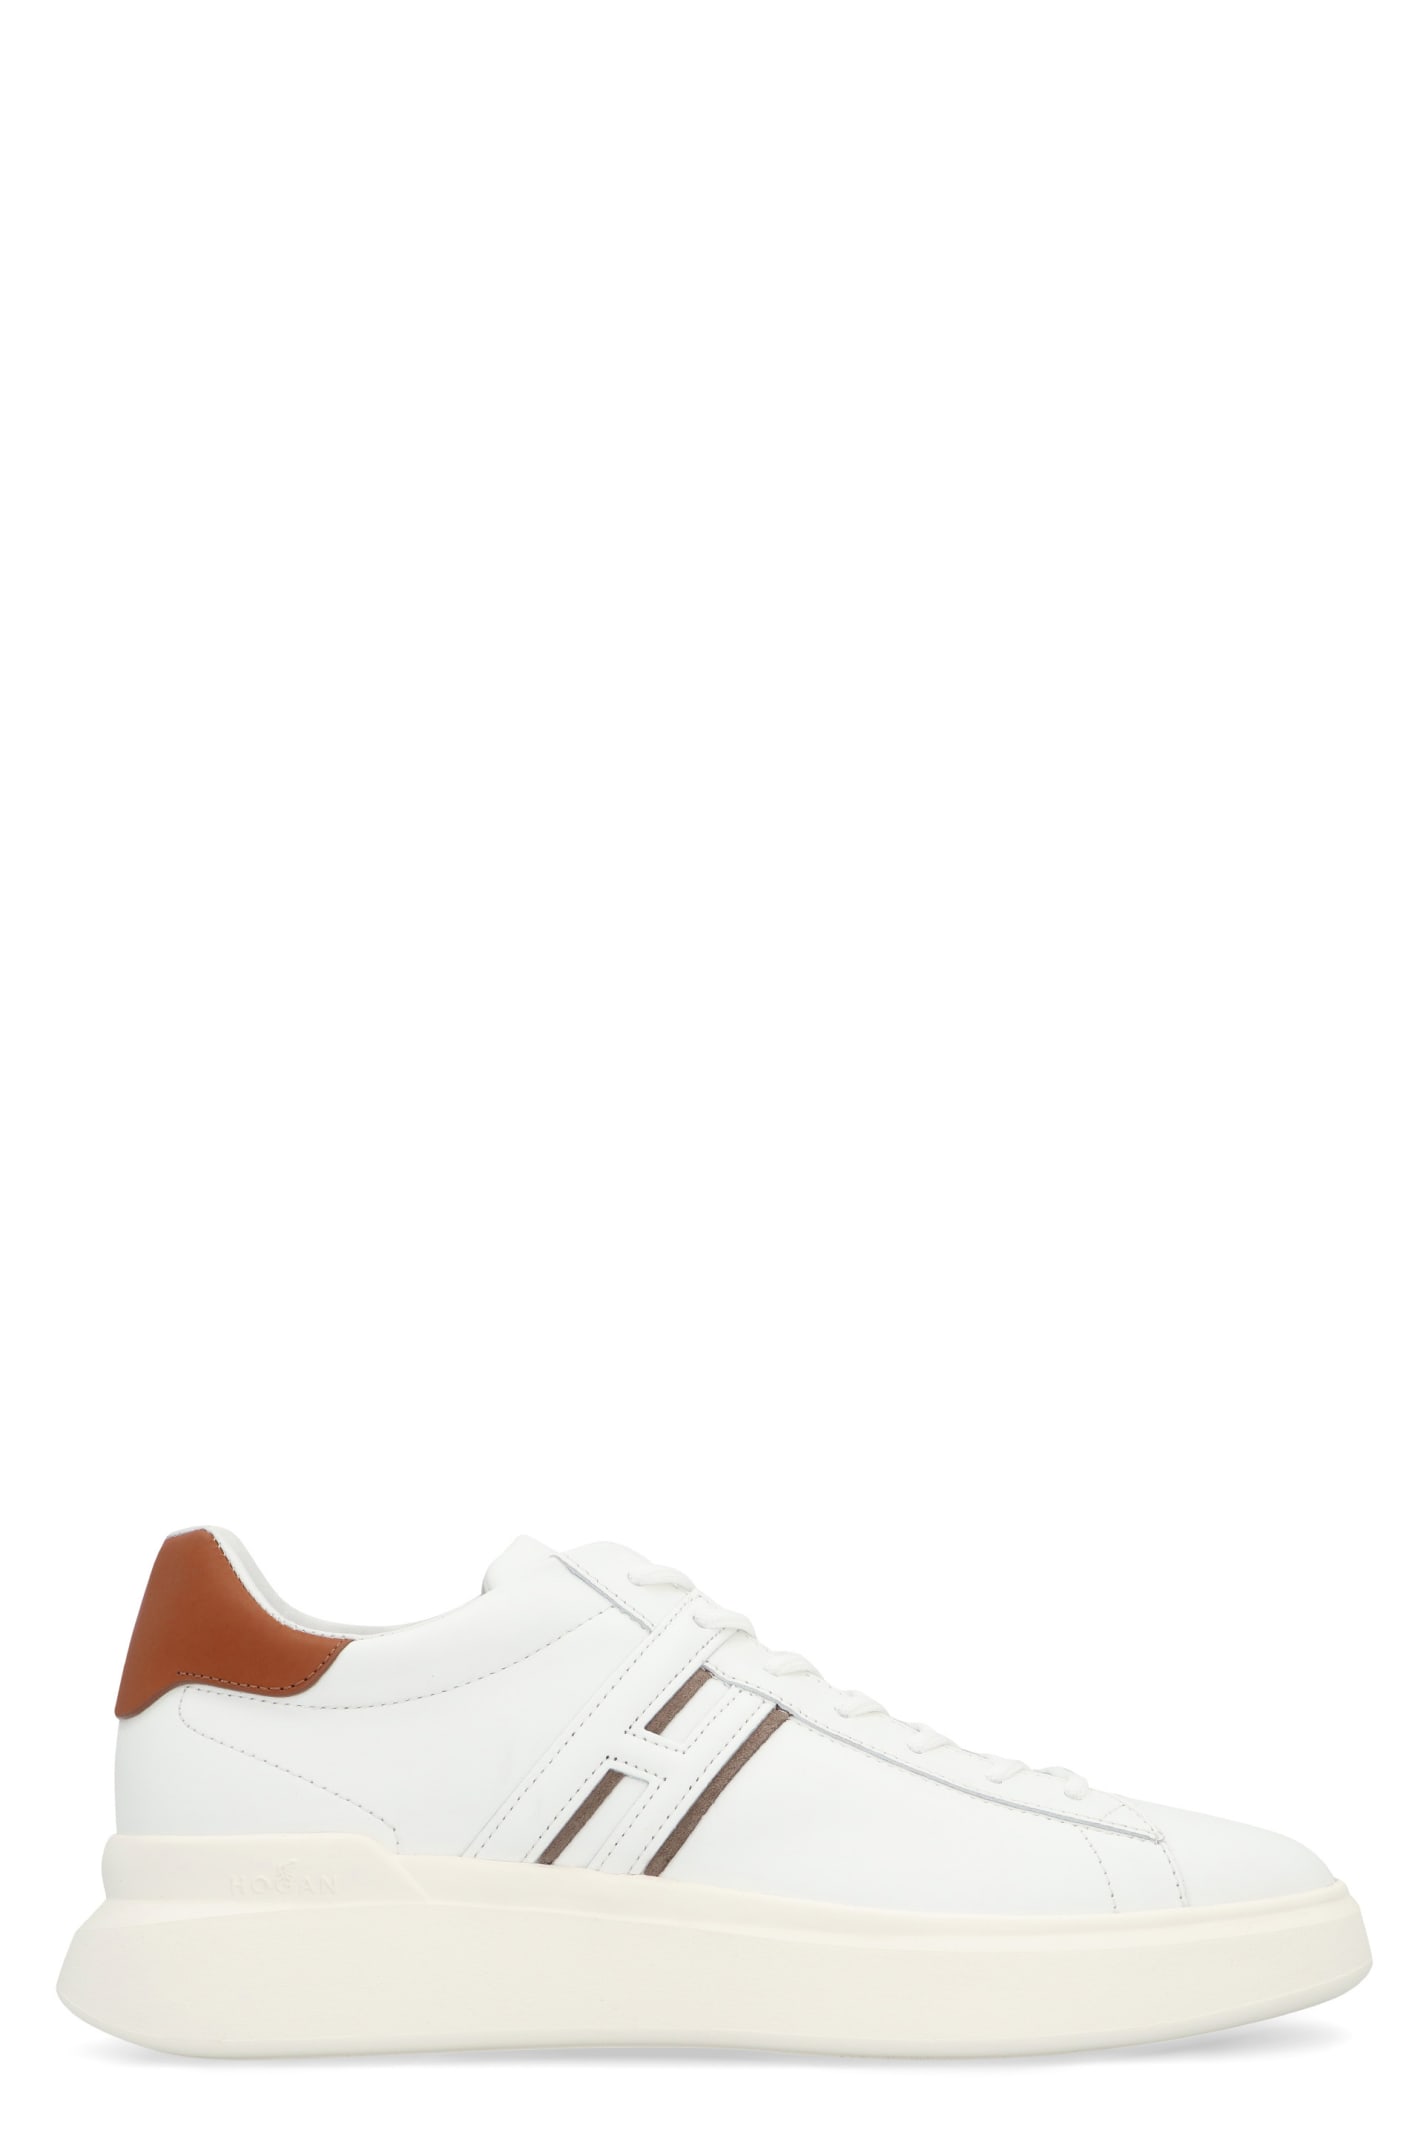 Hogan H580 Low-top Trainers In White